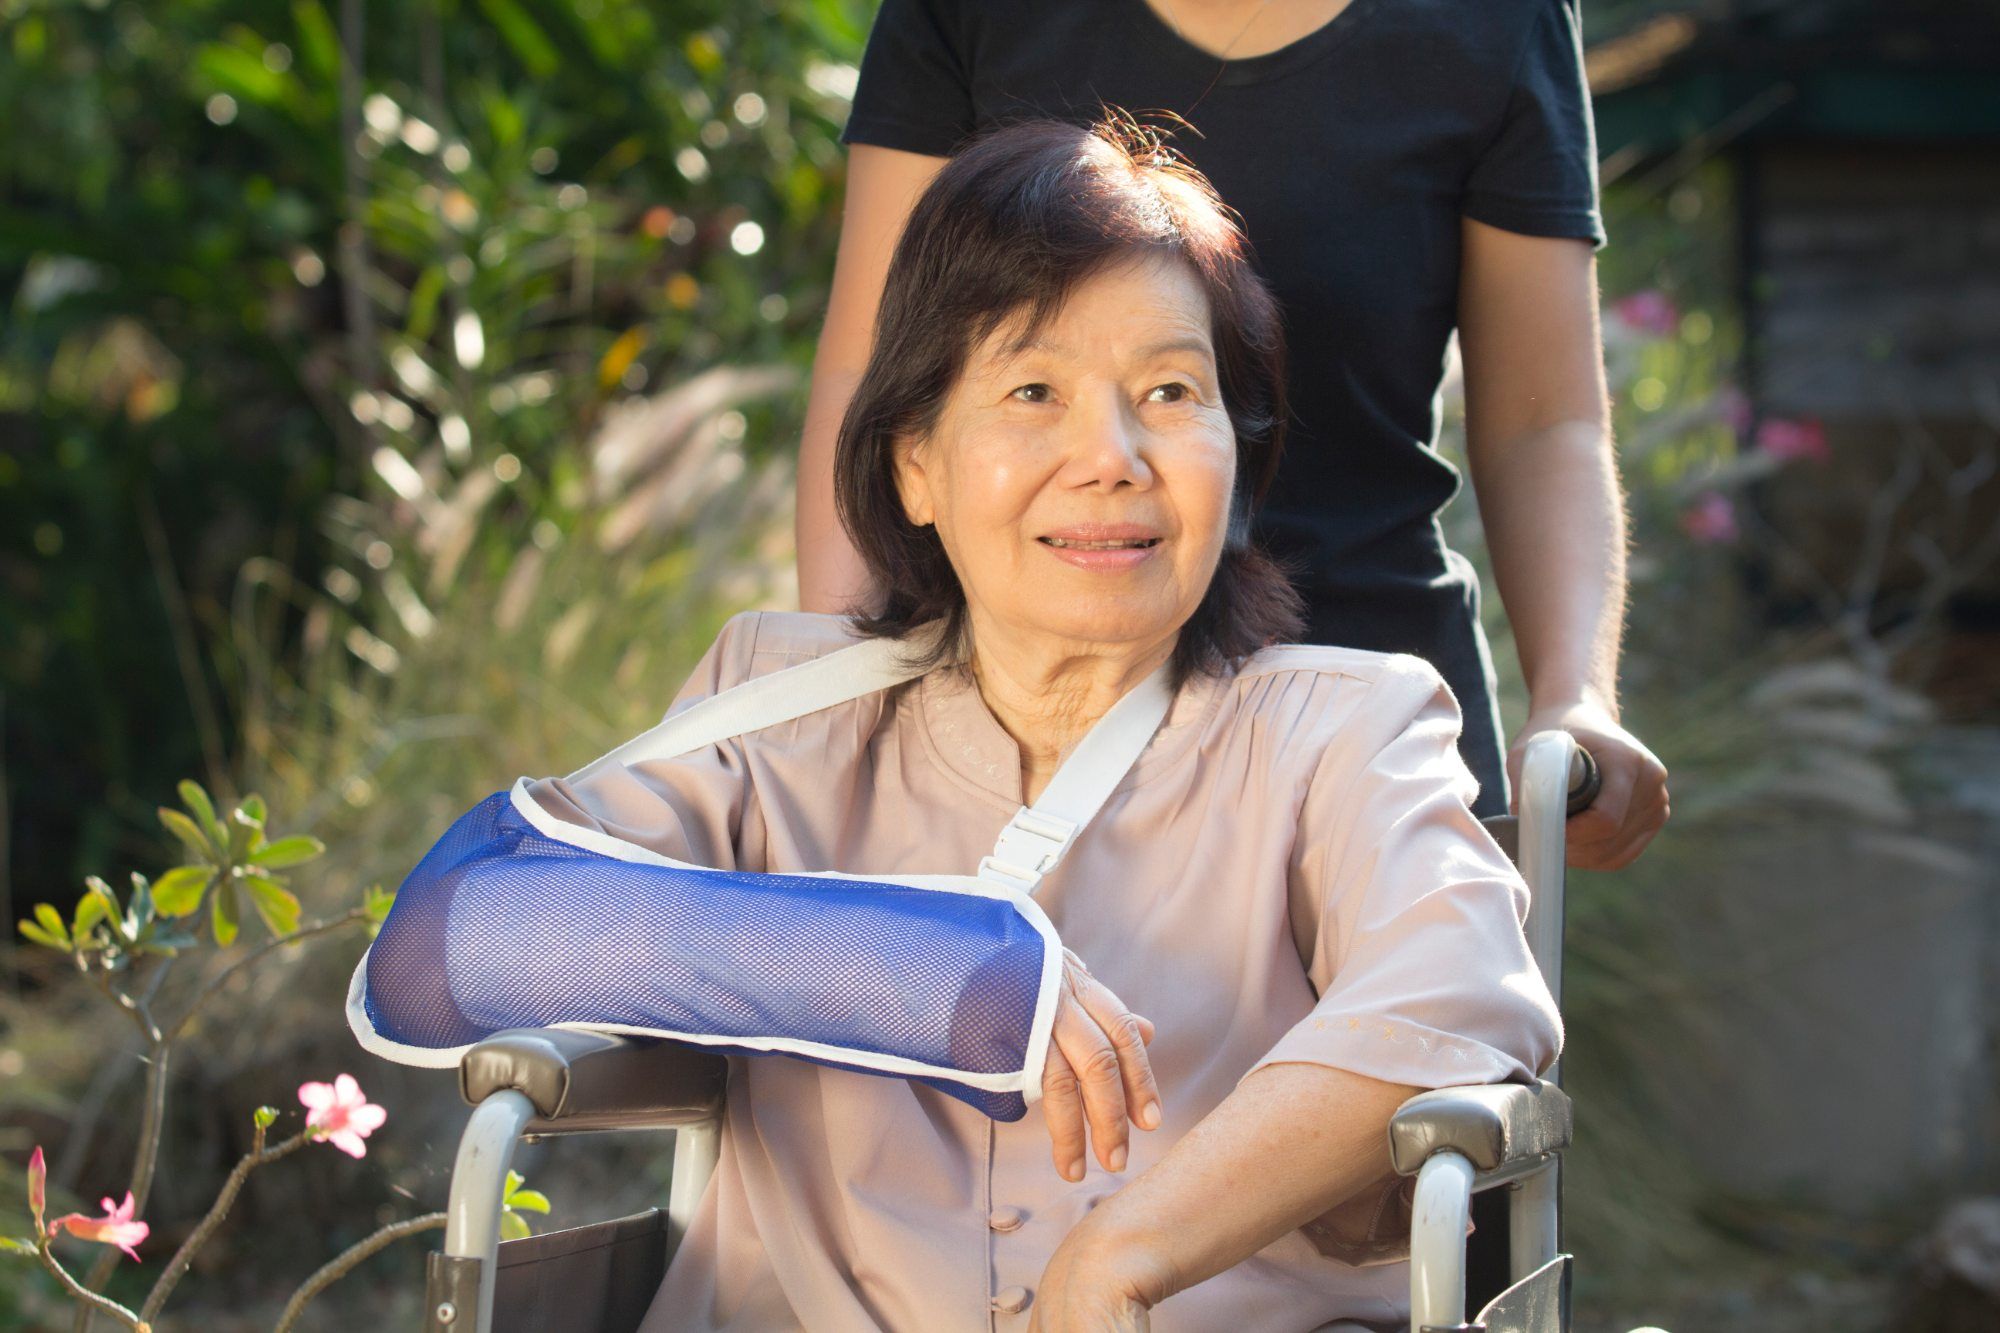 A woman has her arm in a cast.